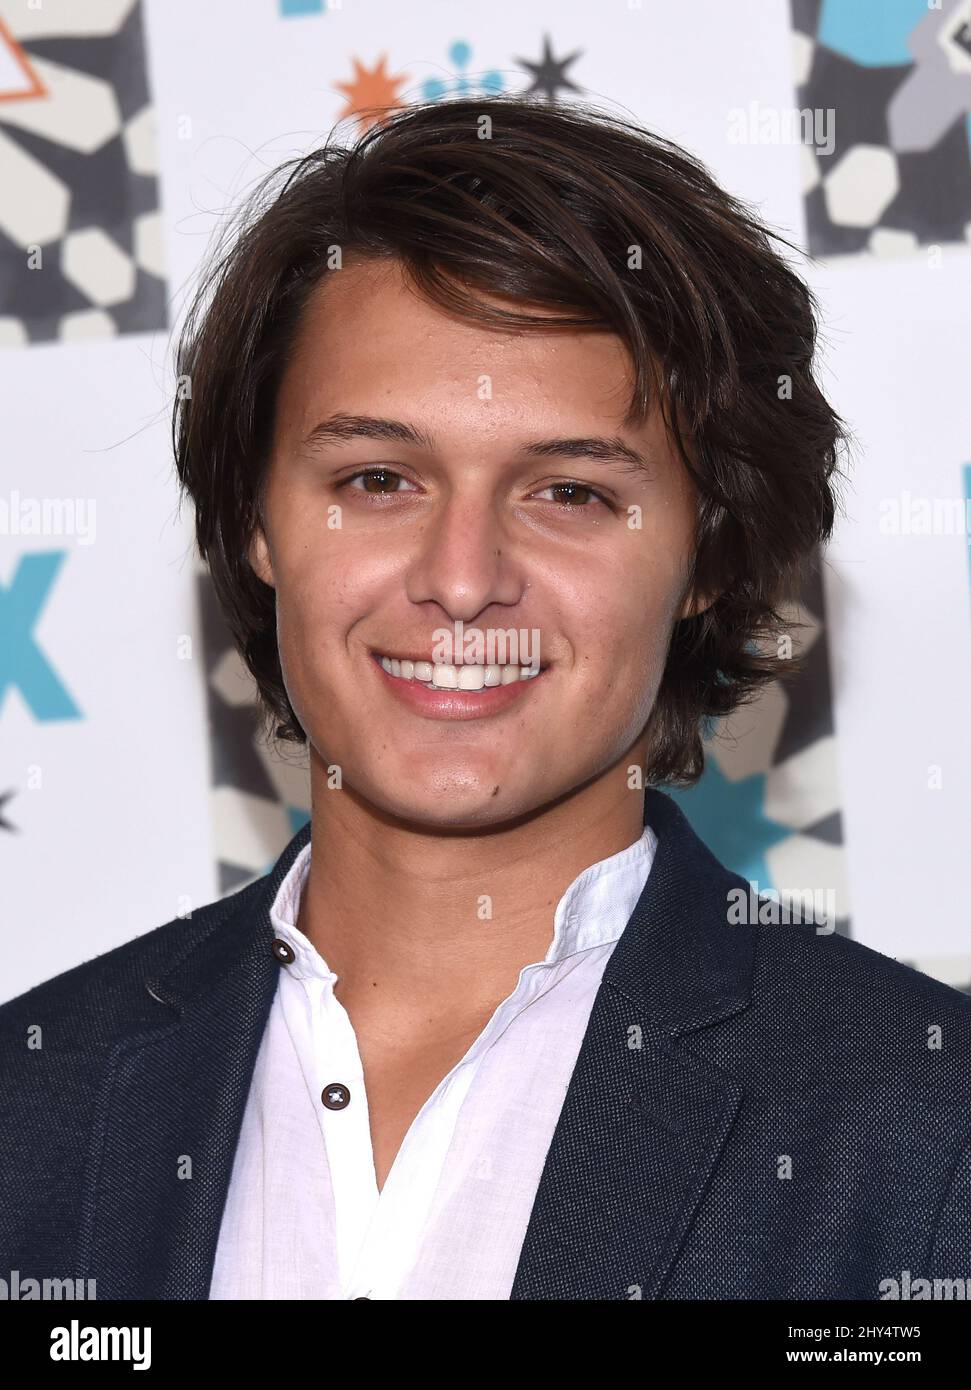 Nolan Sotillo attending the FOX All-Star Summer TCA Party 2014 held at the SoHo House, West Hollywood, California, July 20, 2014. Stock Photo